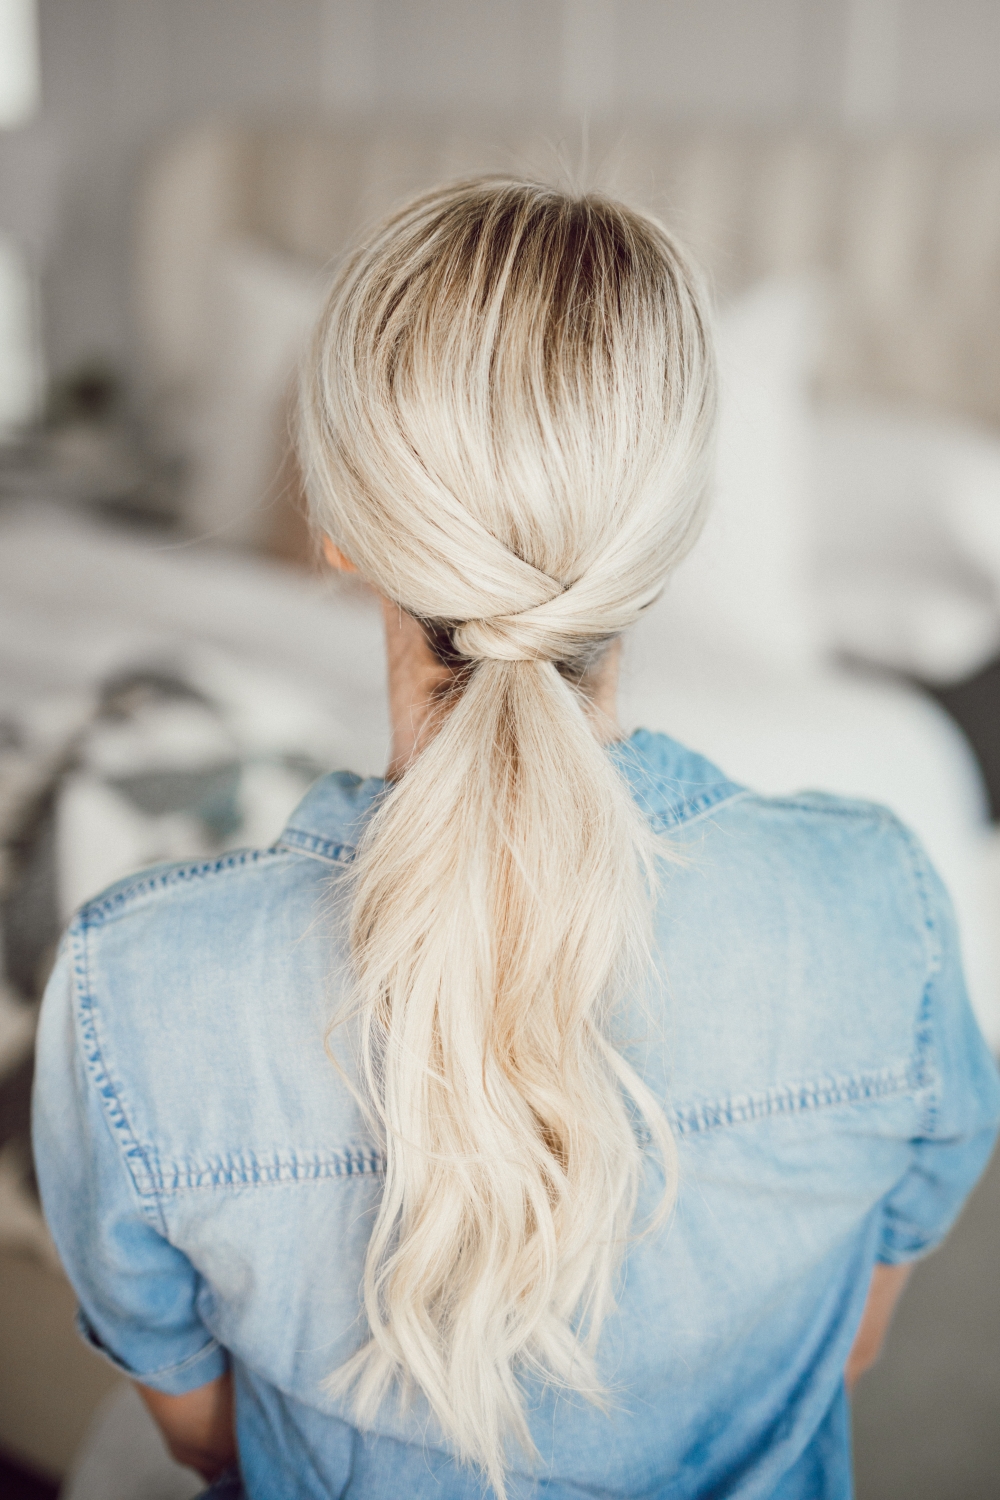 21+ Simple Hairstyles For School Girls